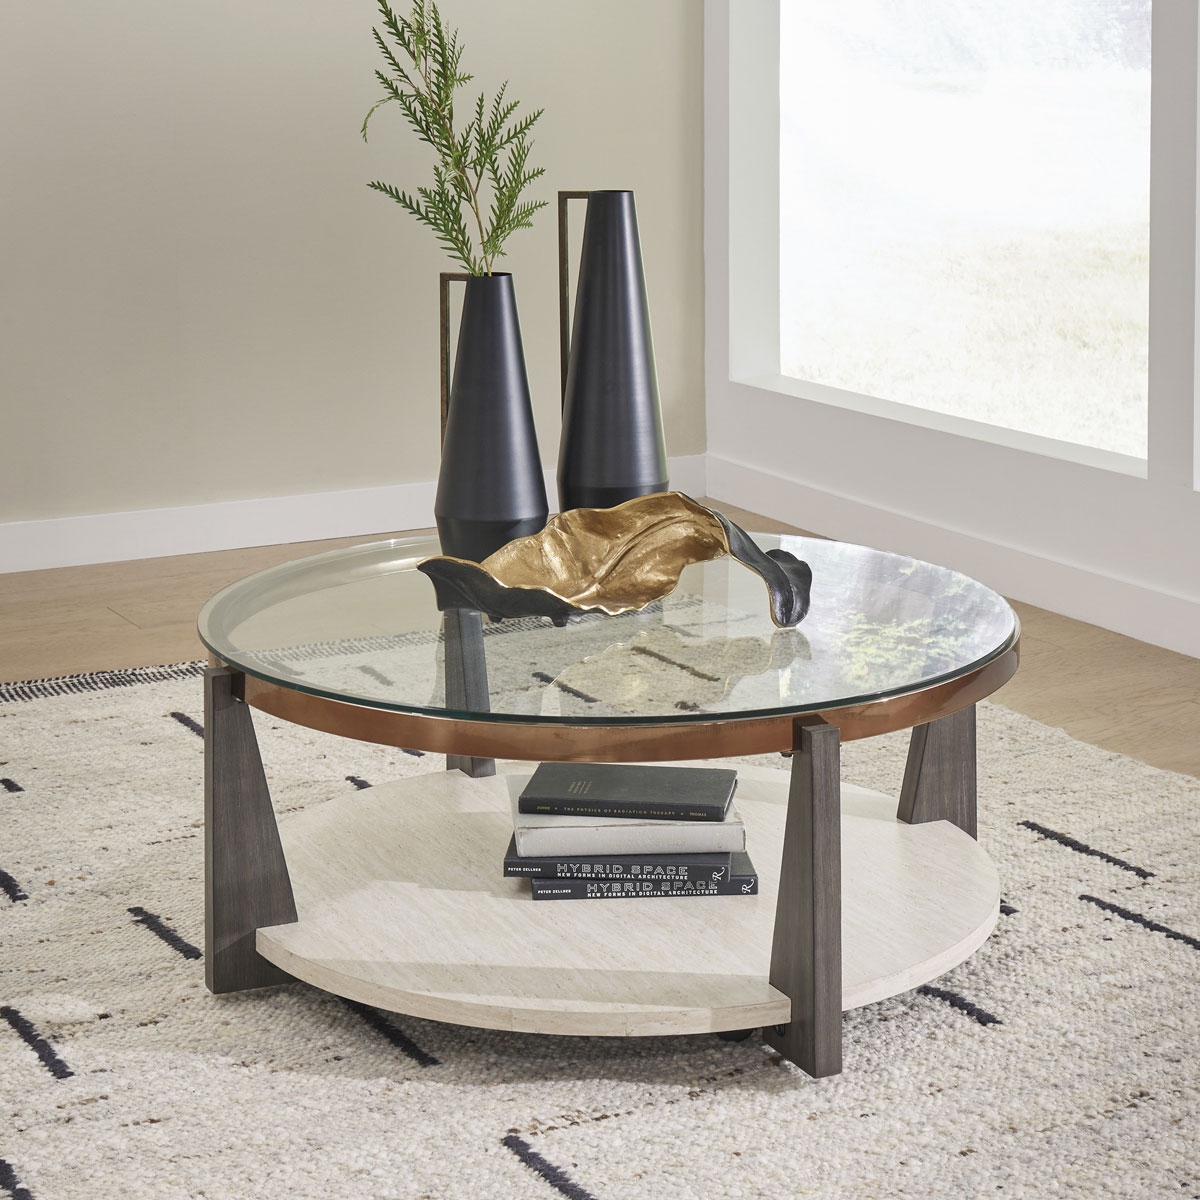 Picture of FRASIER ROUND COCKTAIL TABLE W/ CASTERS